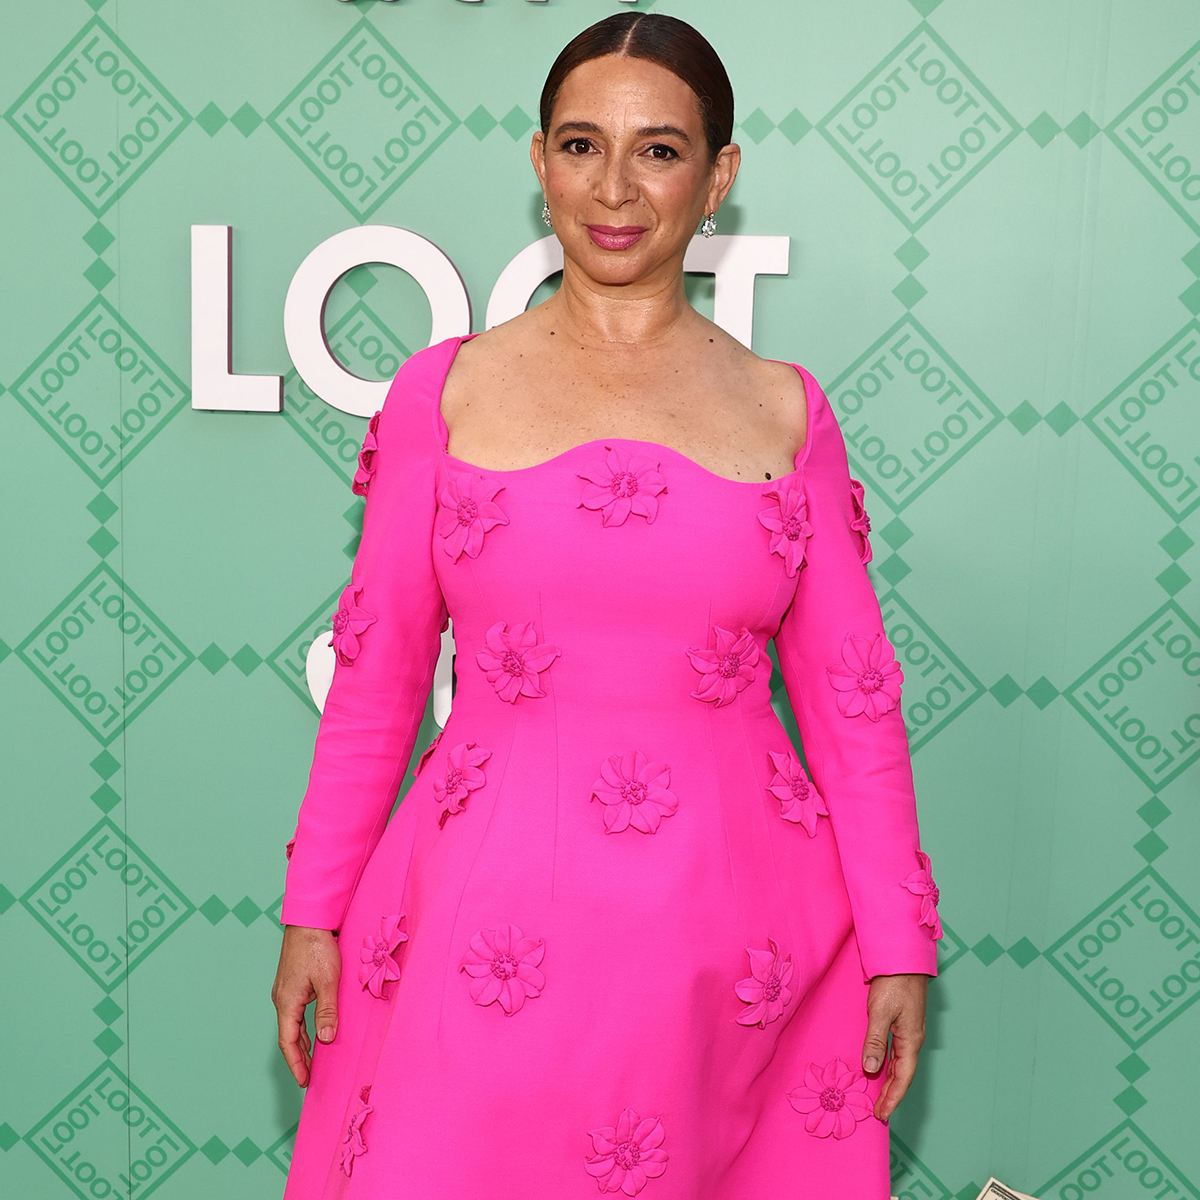 Actress Maya Rudolph to replace M&M's colorful spokescandies